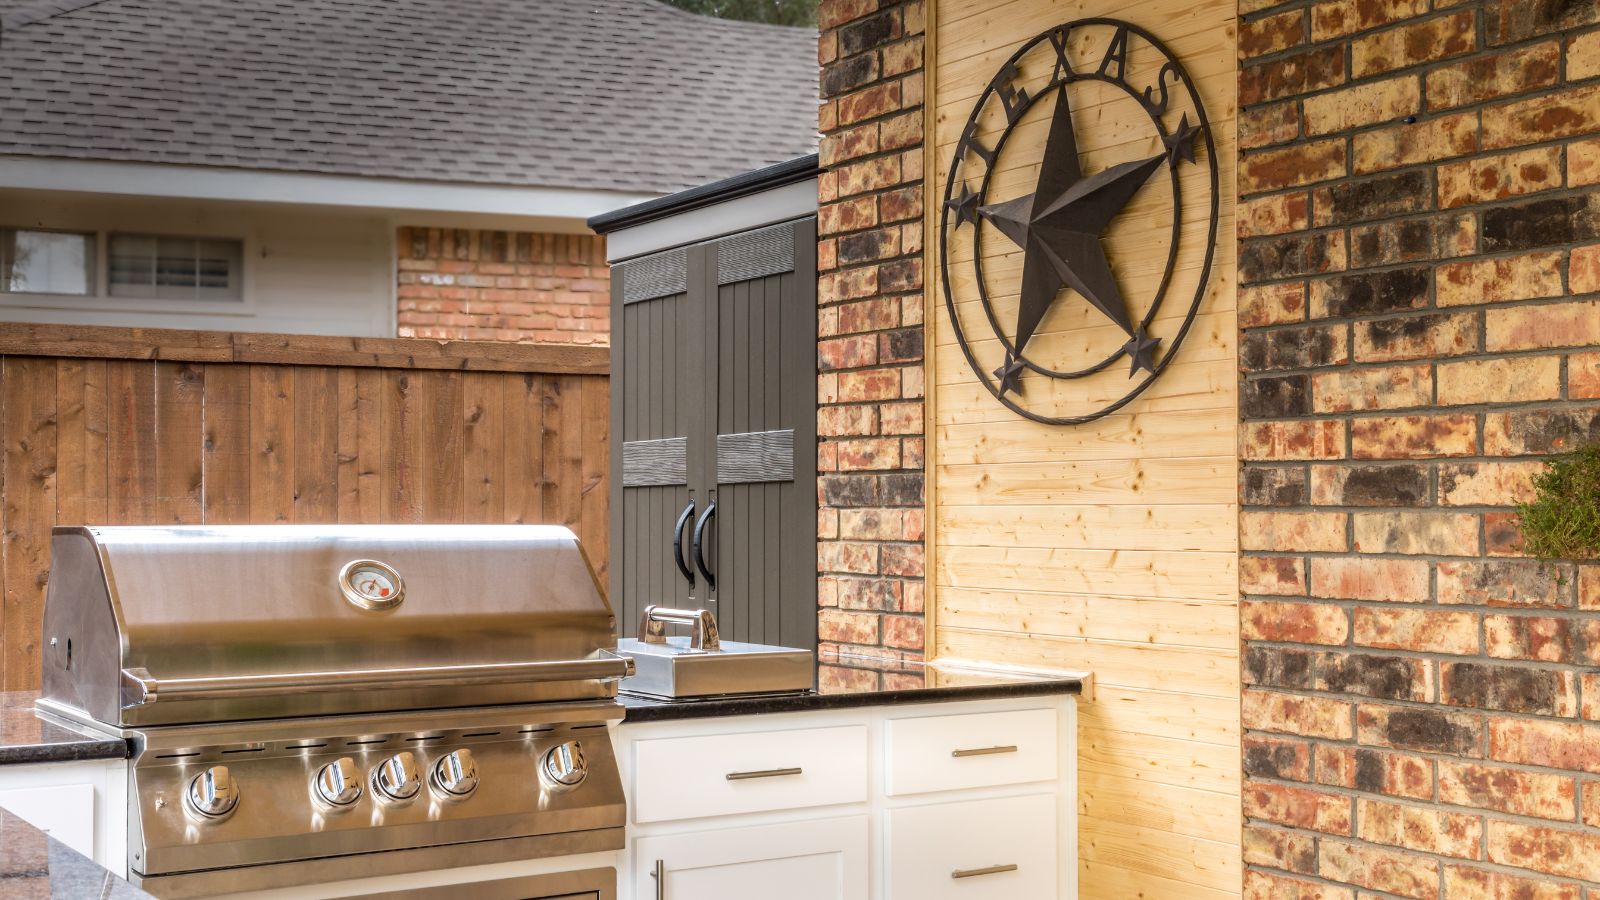 The Benefits of an Outdoor Kitchen
